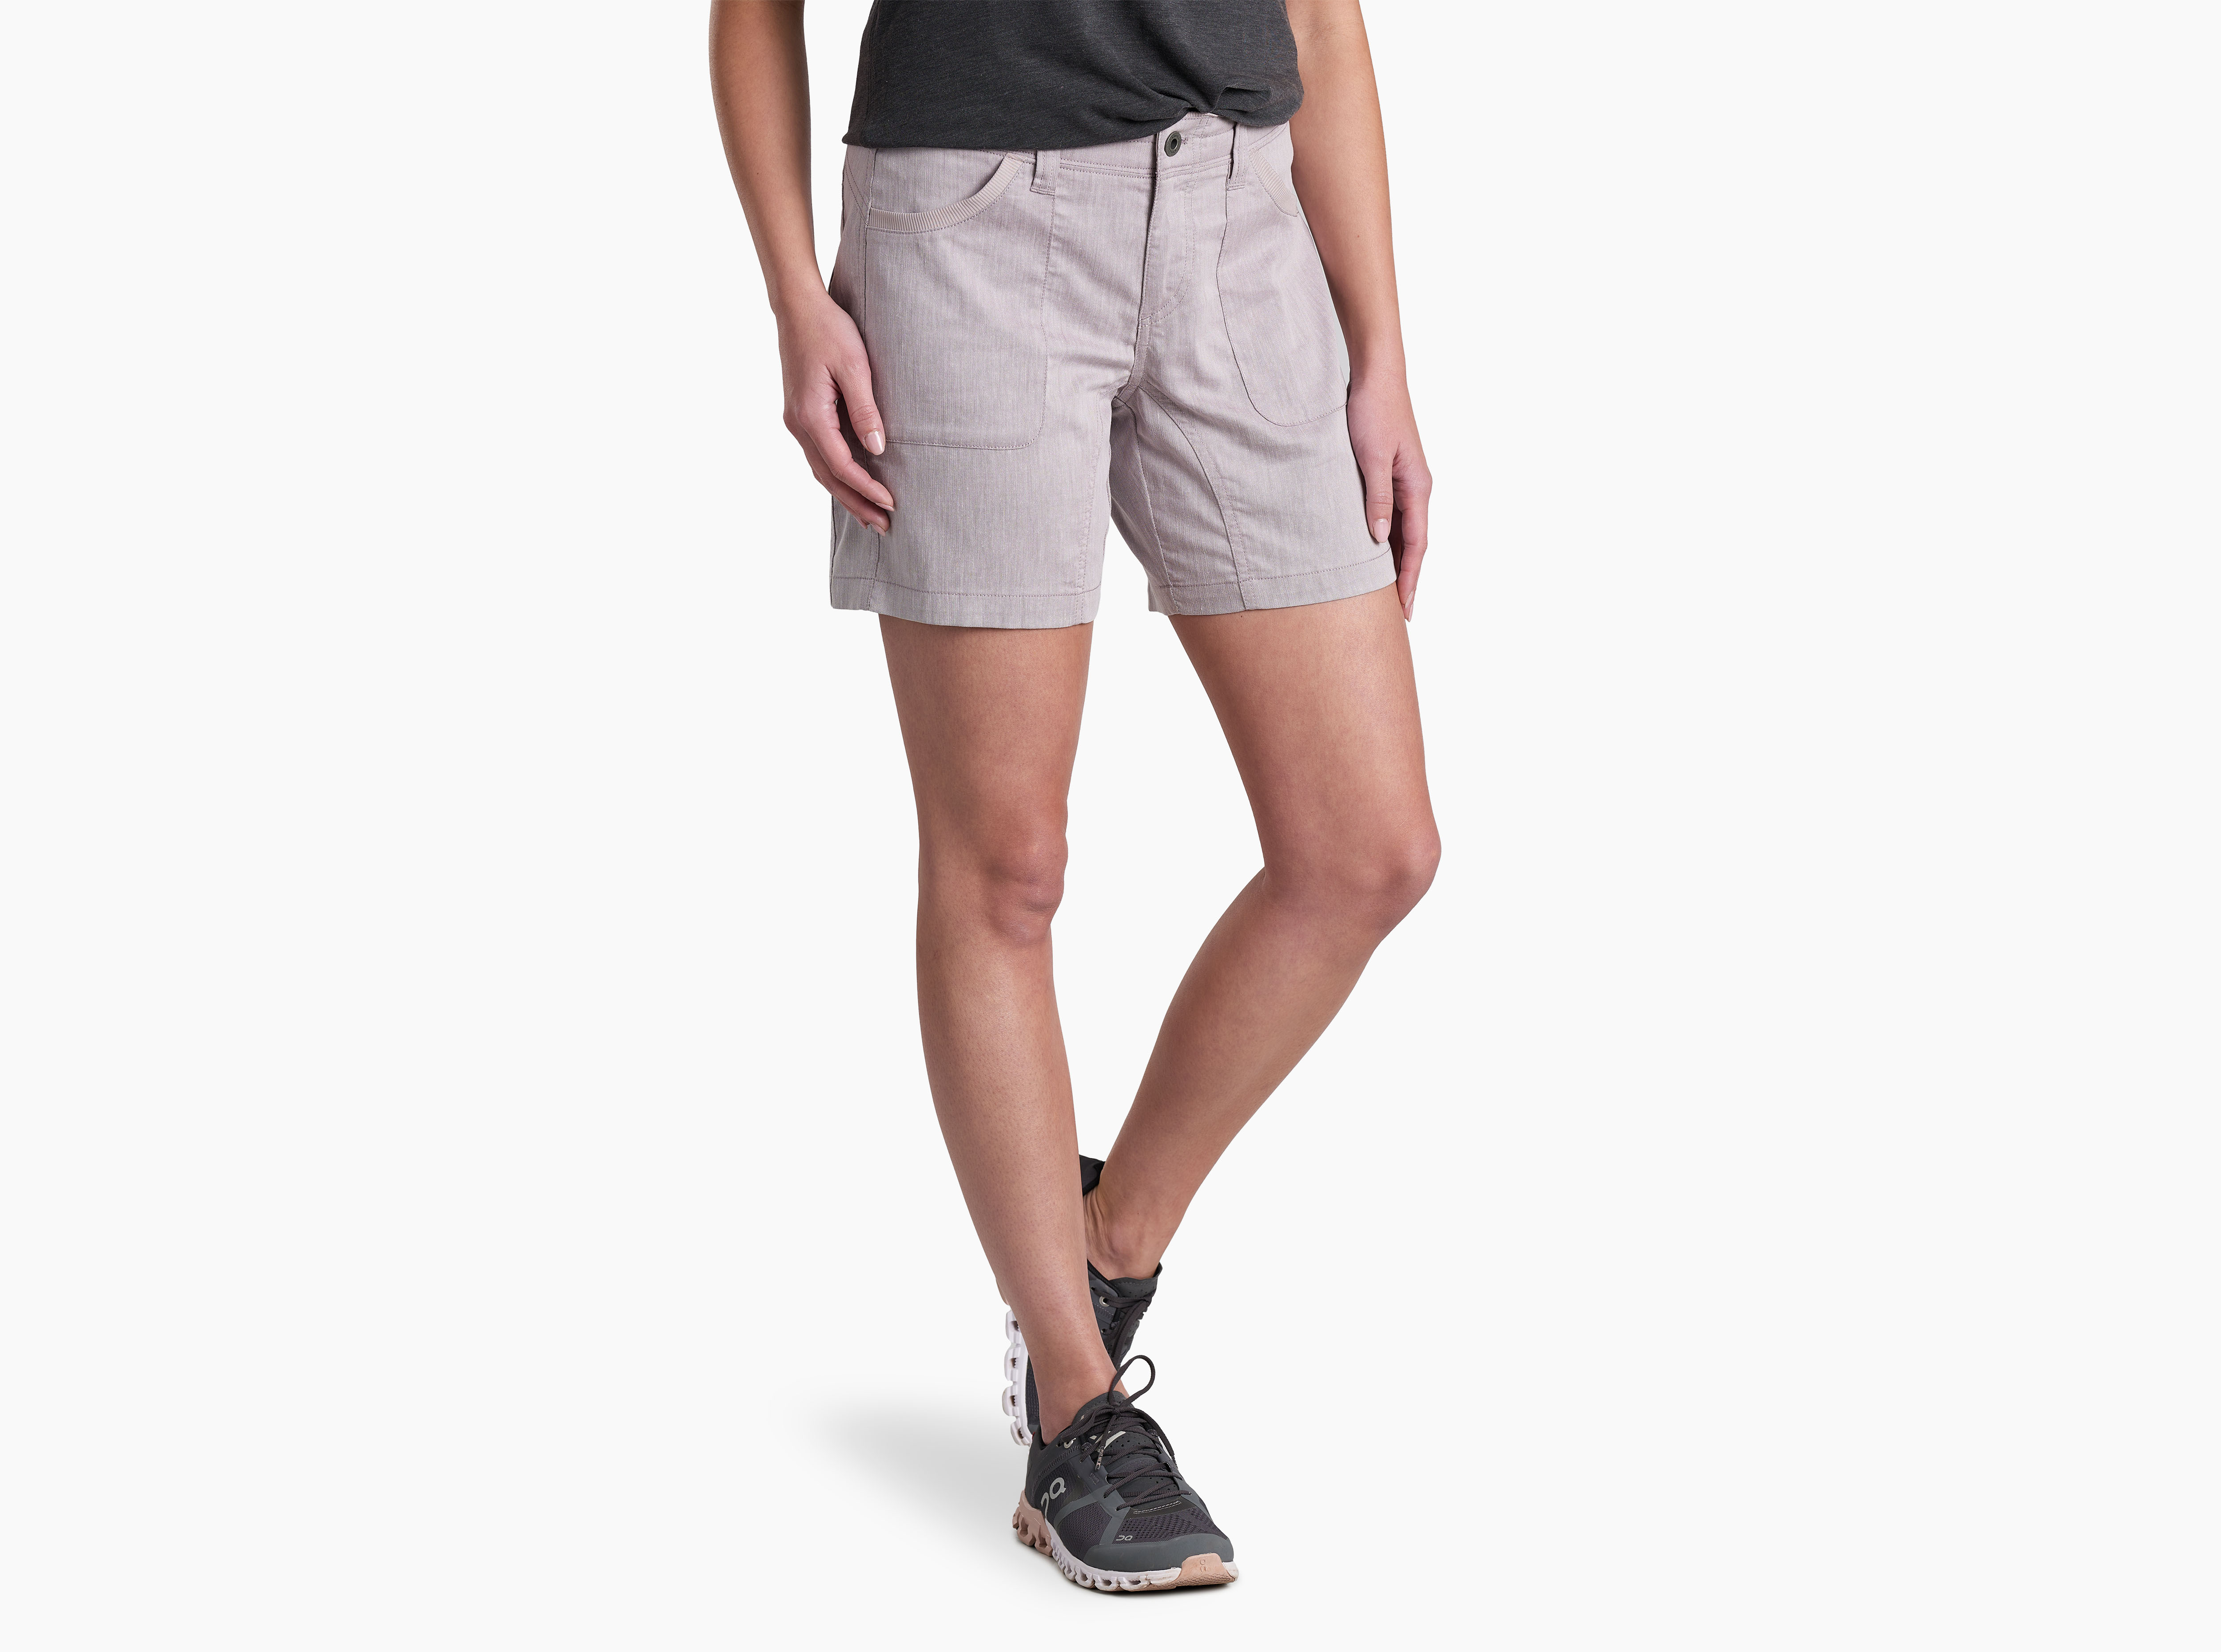 KÜHL Pants and Shorts for Summer: These Bottoms Are Top-Tier